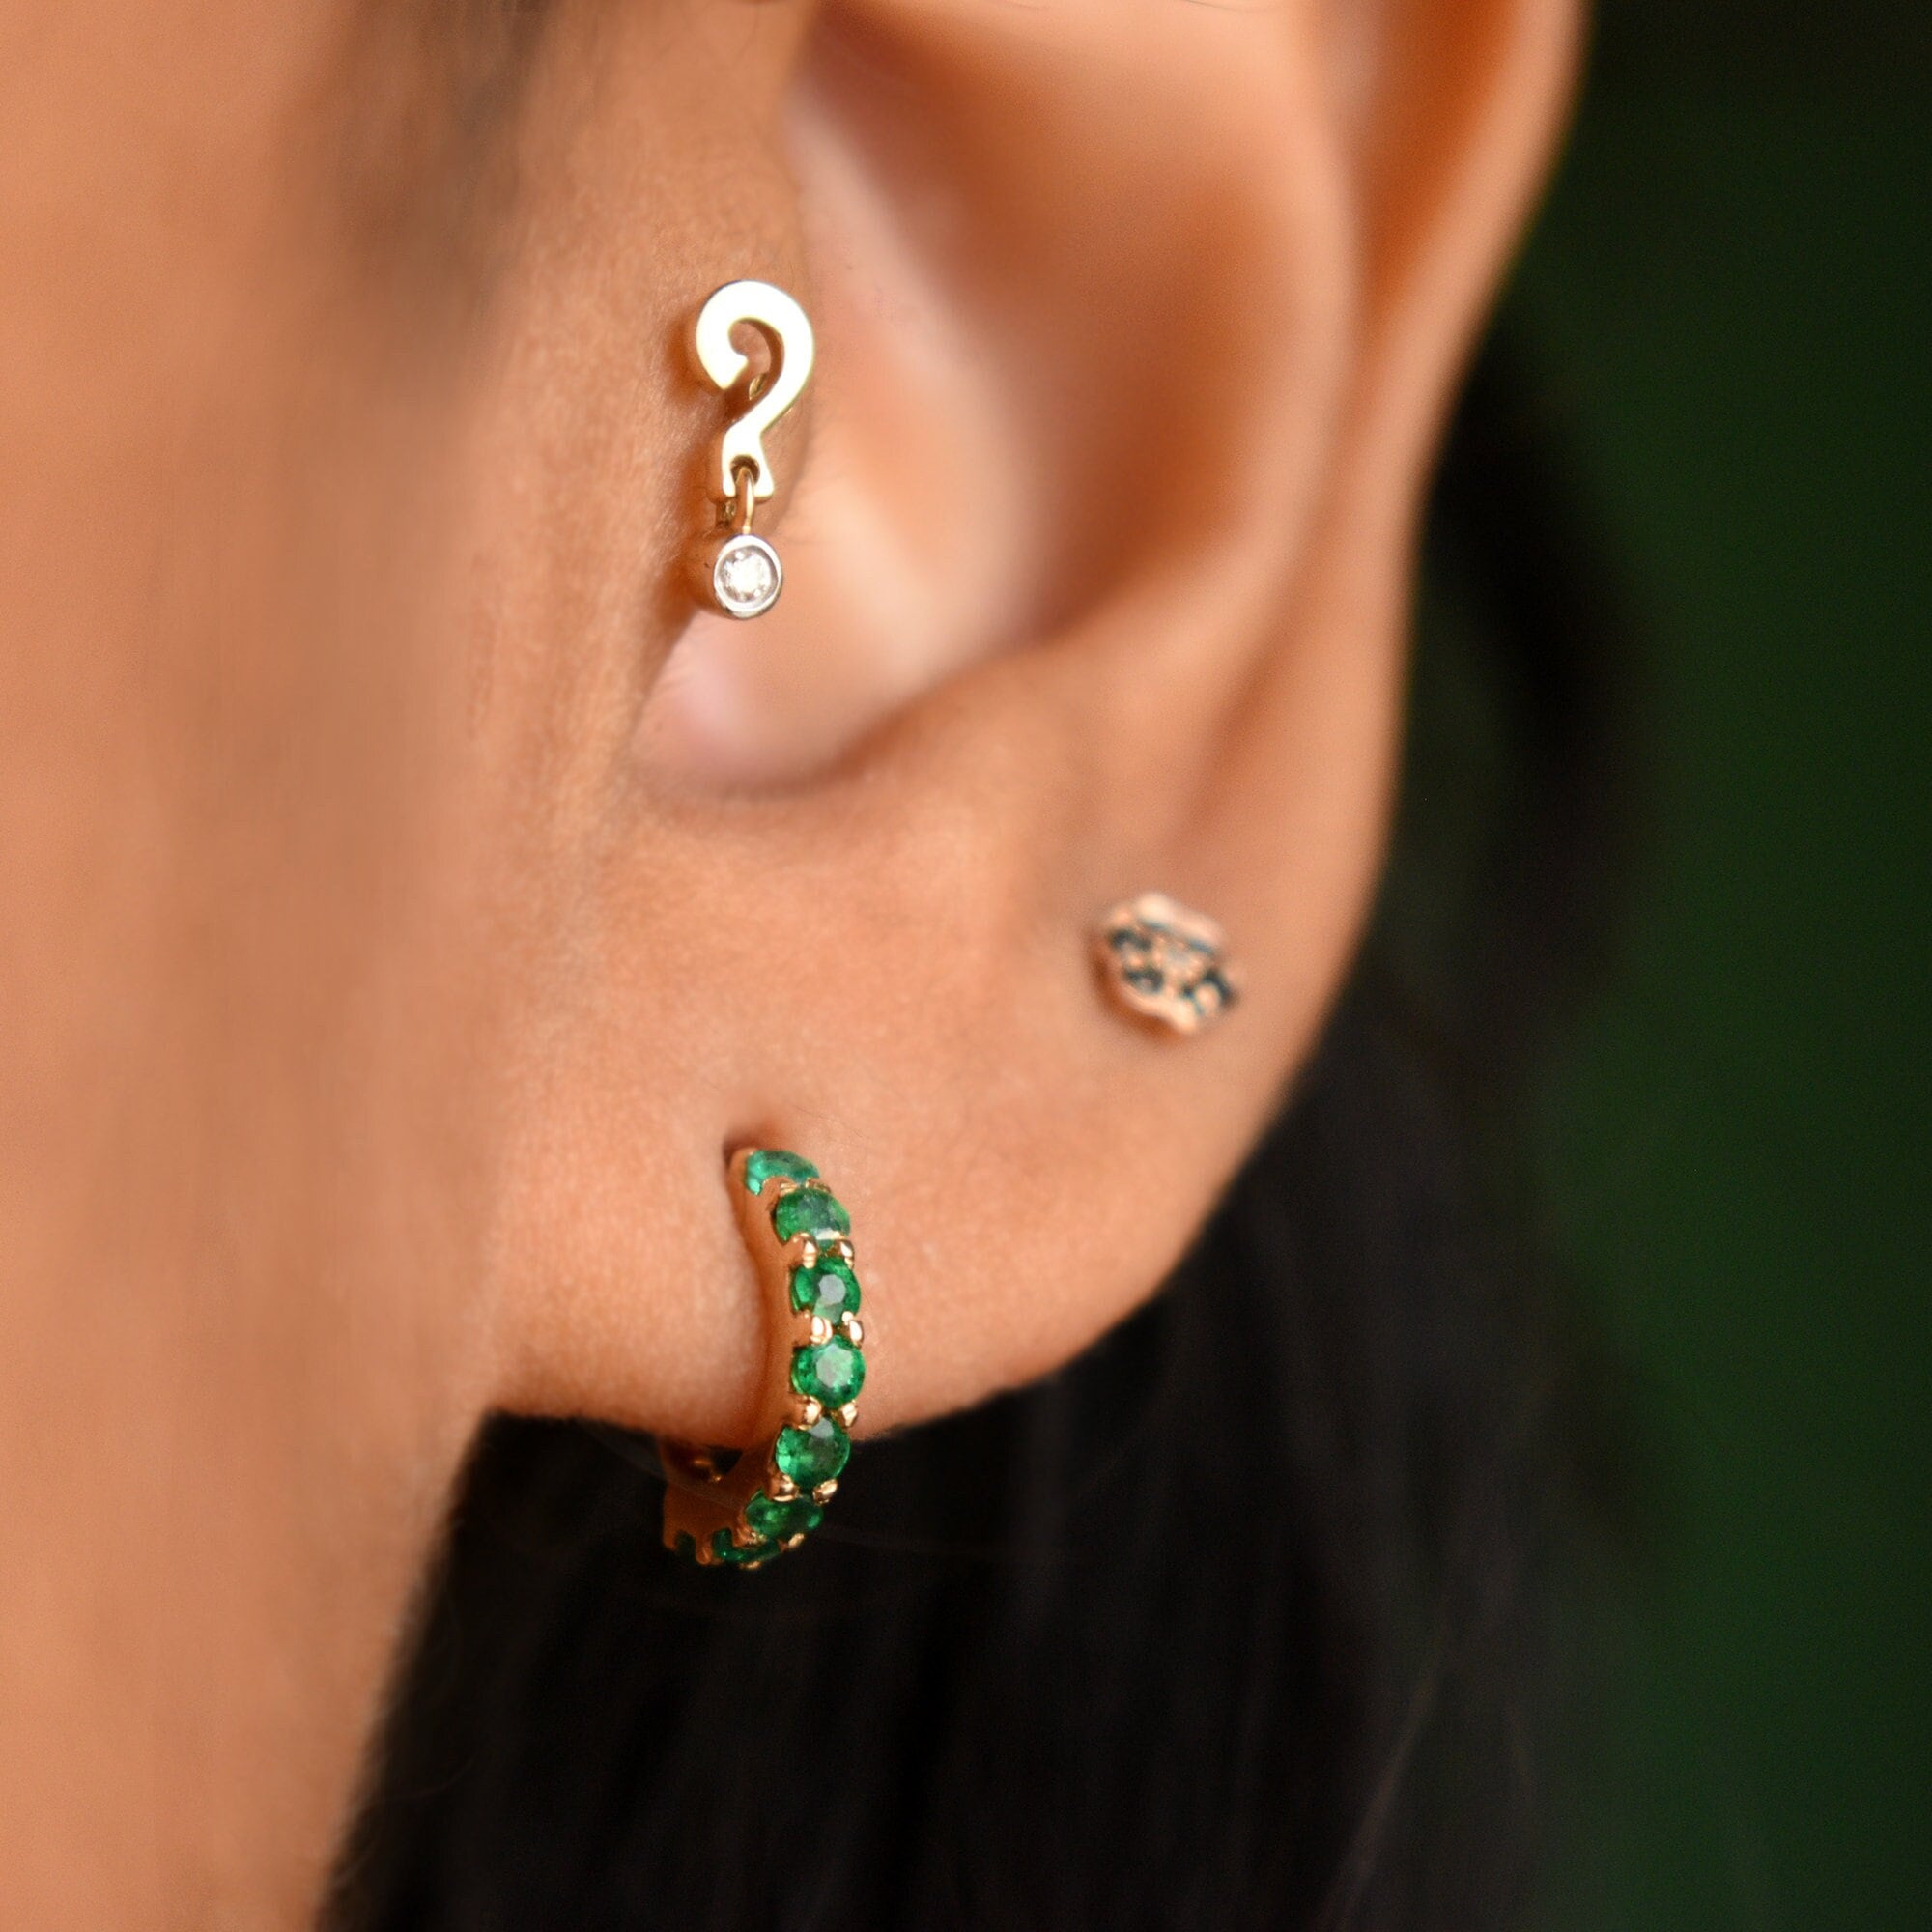 6mm-13mm Natural Green Emerald 18g Clicker, 14k 18k Solid Gold 2.5mm Hinged Hoop Earring, Nose Cartilage Conch Anti Helix Lip Piercing